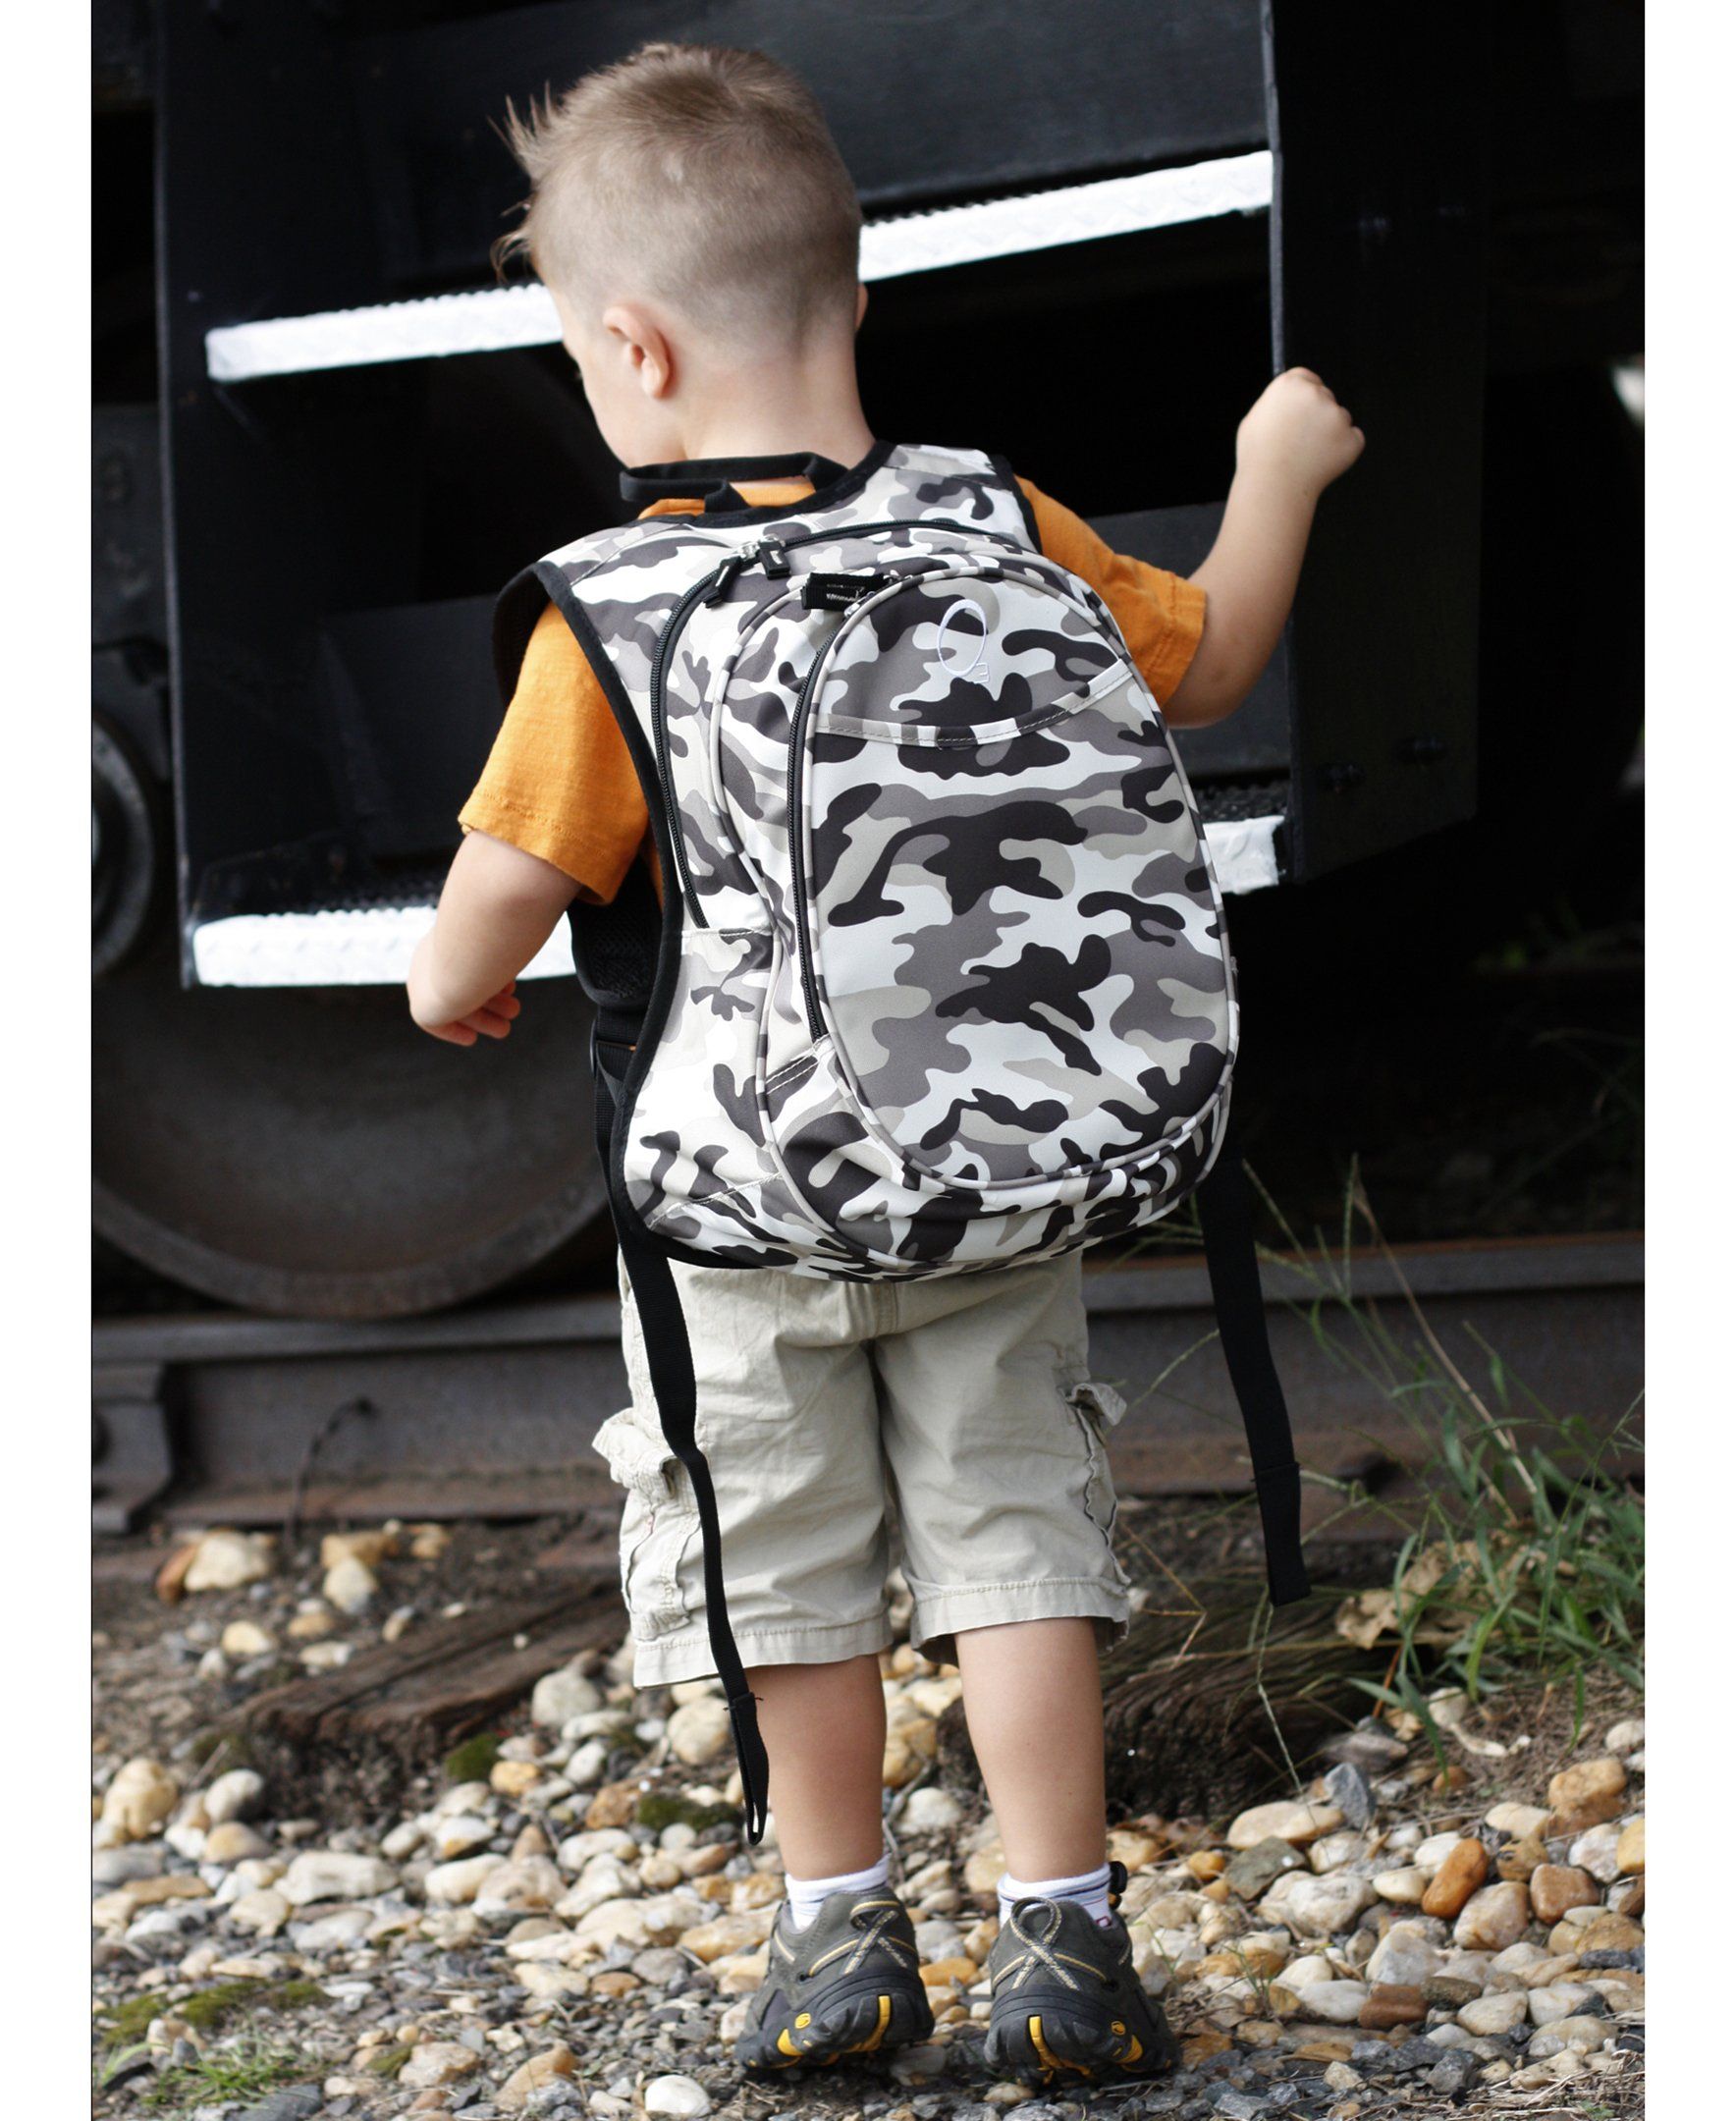 O3KCBP009 Obersee Mini Preschool All-in-One Backpack for Toddlers and Kids with integrated Insulated Cooler | Camo Camouflage - image 5 of 6